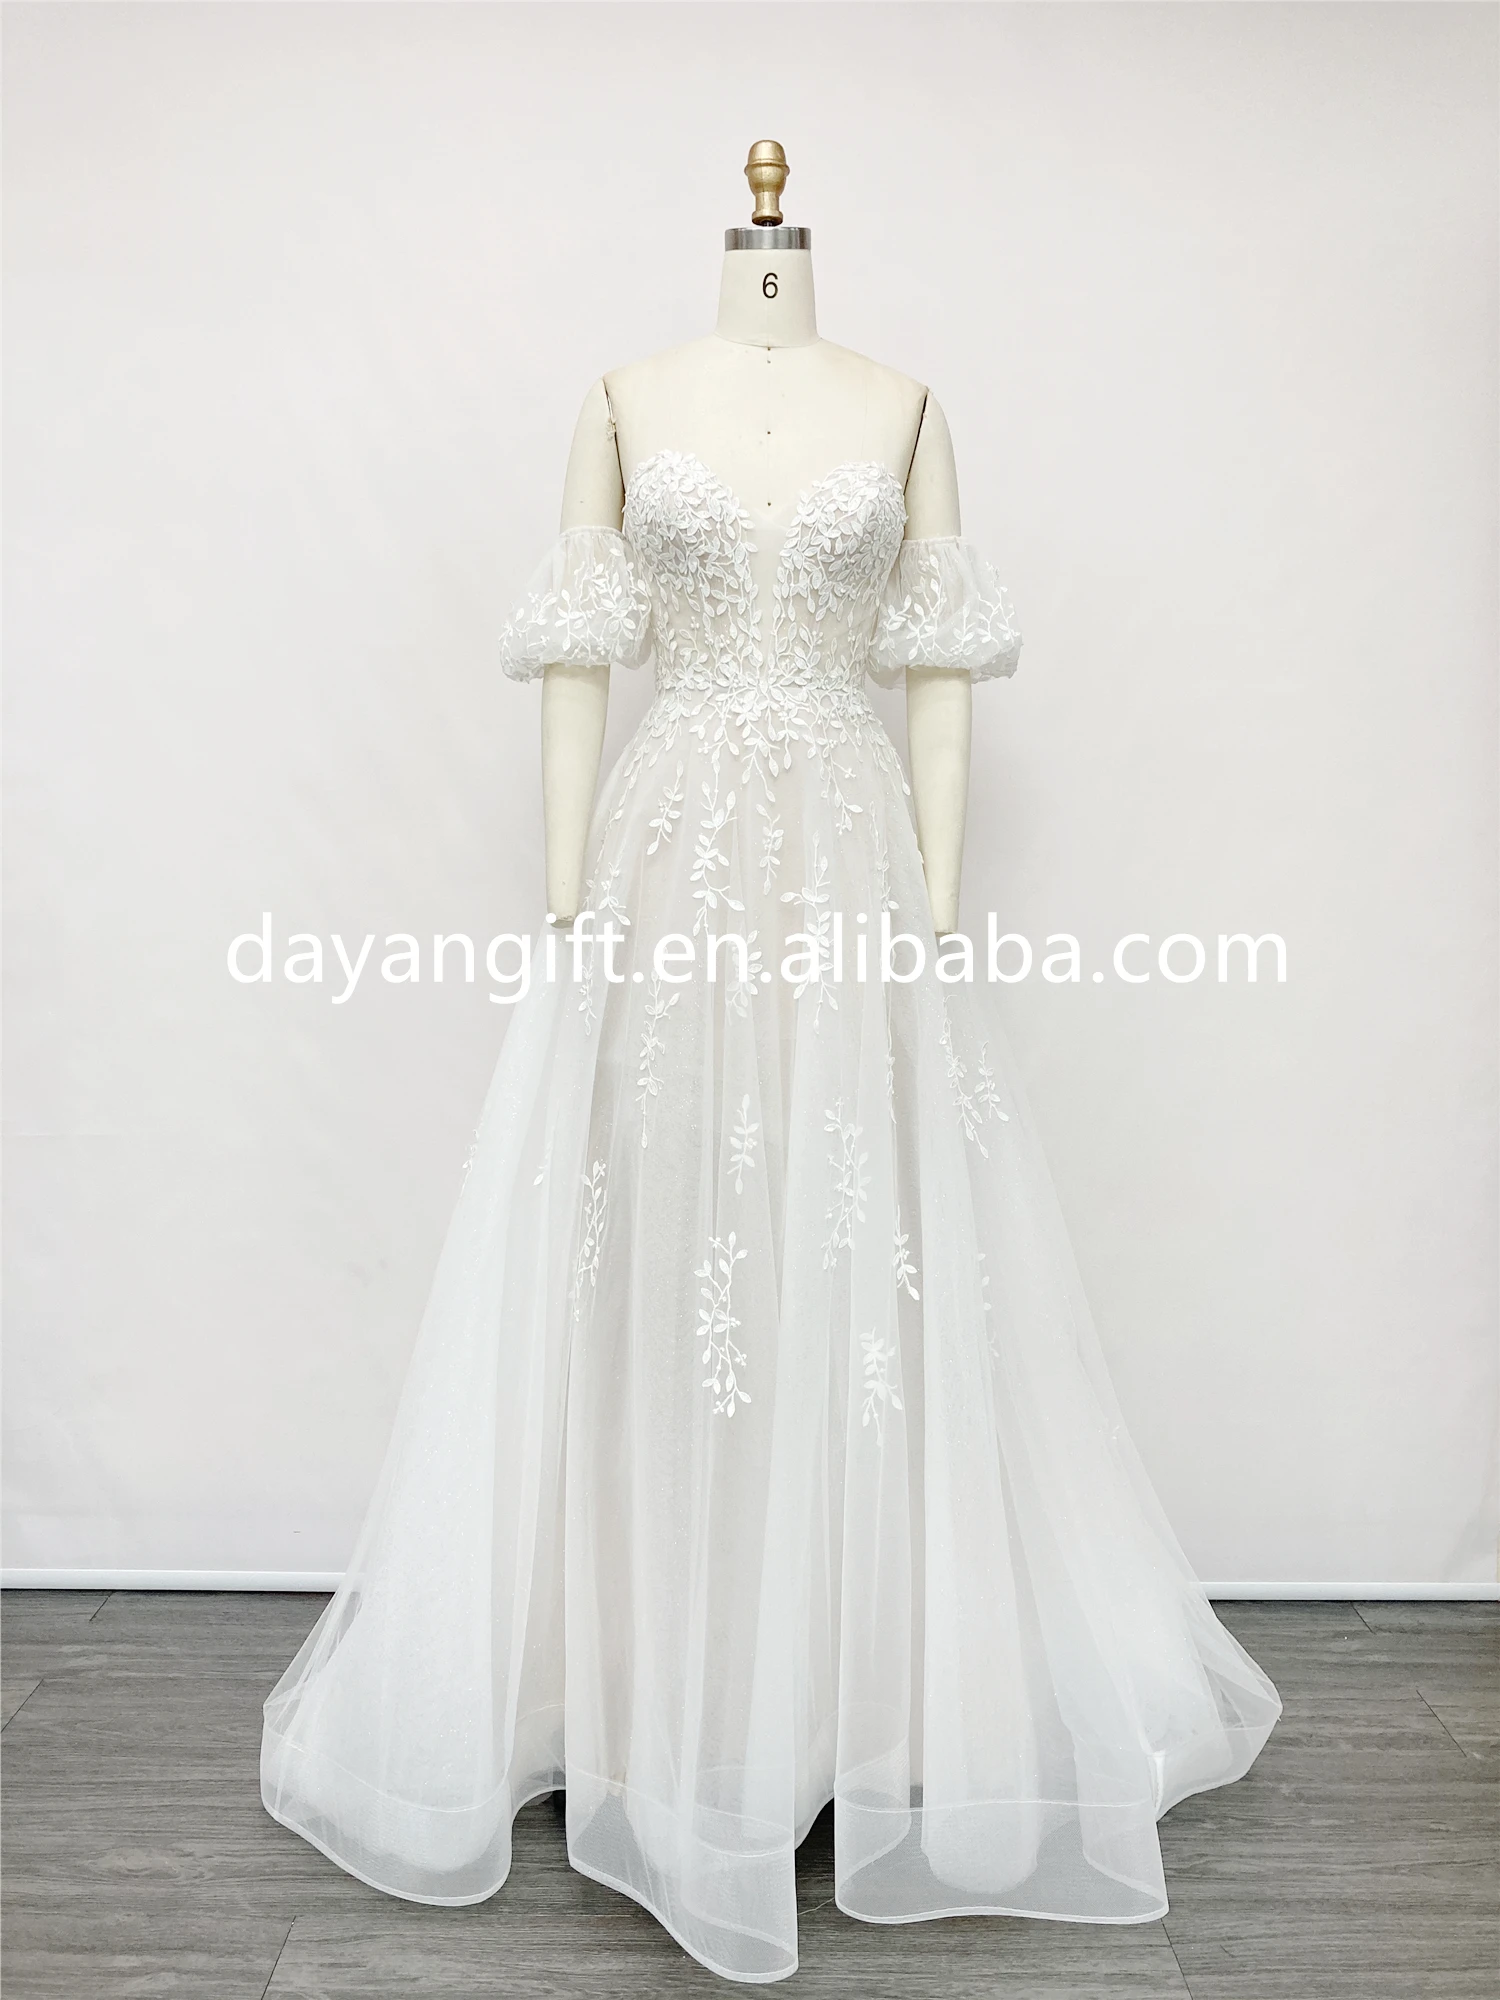 Summer Fashion Flower Lace Embroidered Bride Gown Short Sleeve White Wedding Dresses